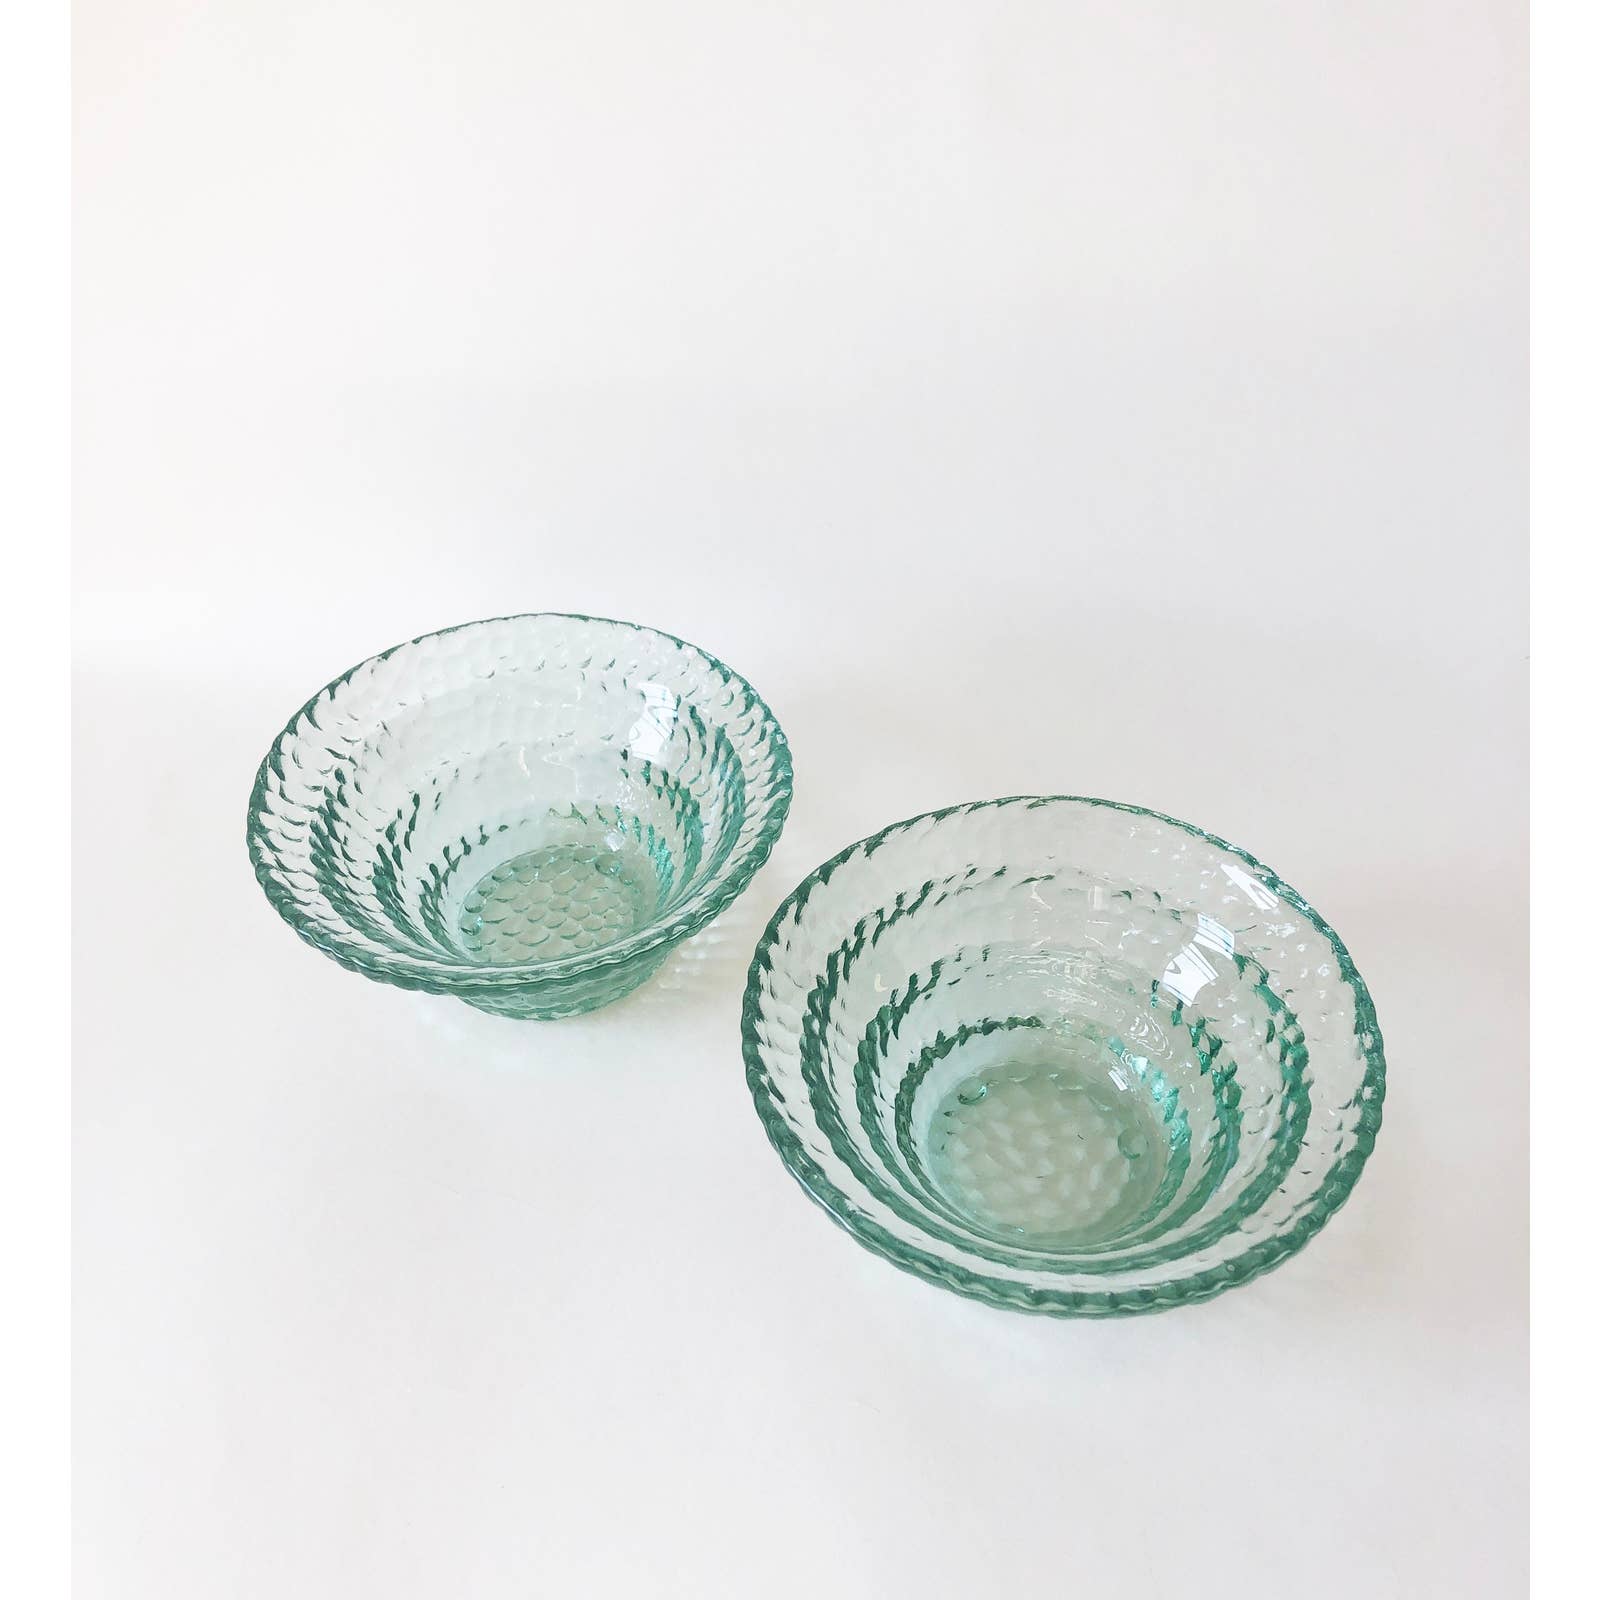 Recycled Glass Bowls, Set of 6 - Green